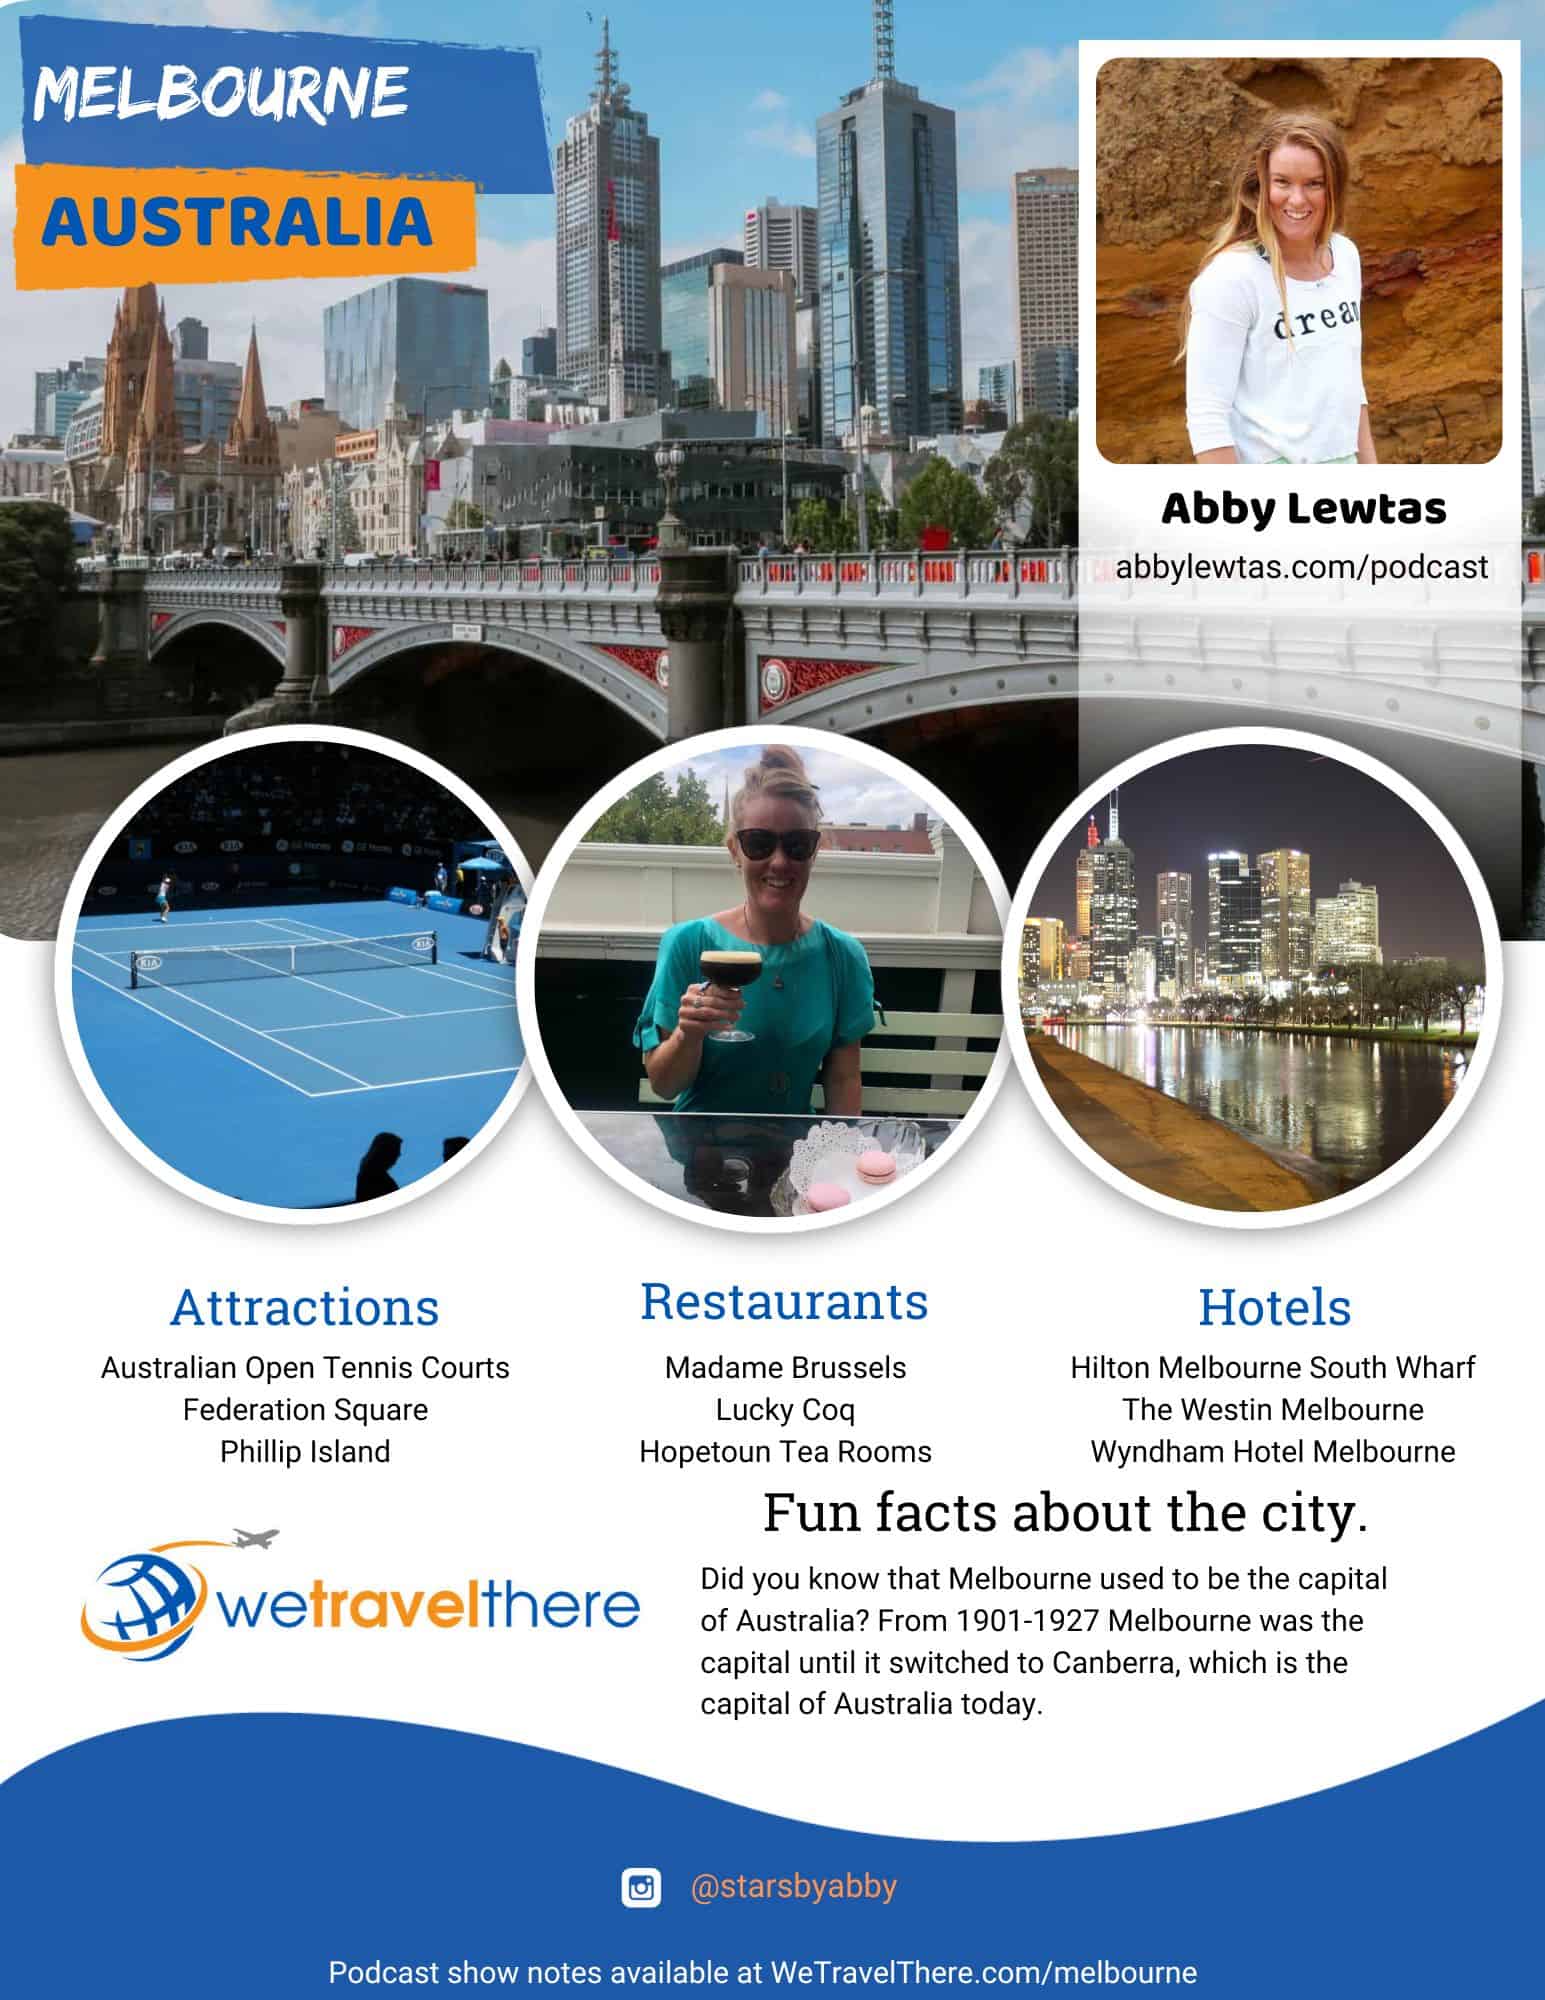 We-Travel-There-Melbourne-Australia-Abby-Lewtas-podcast-one-sheet